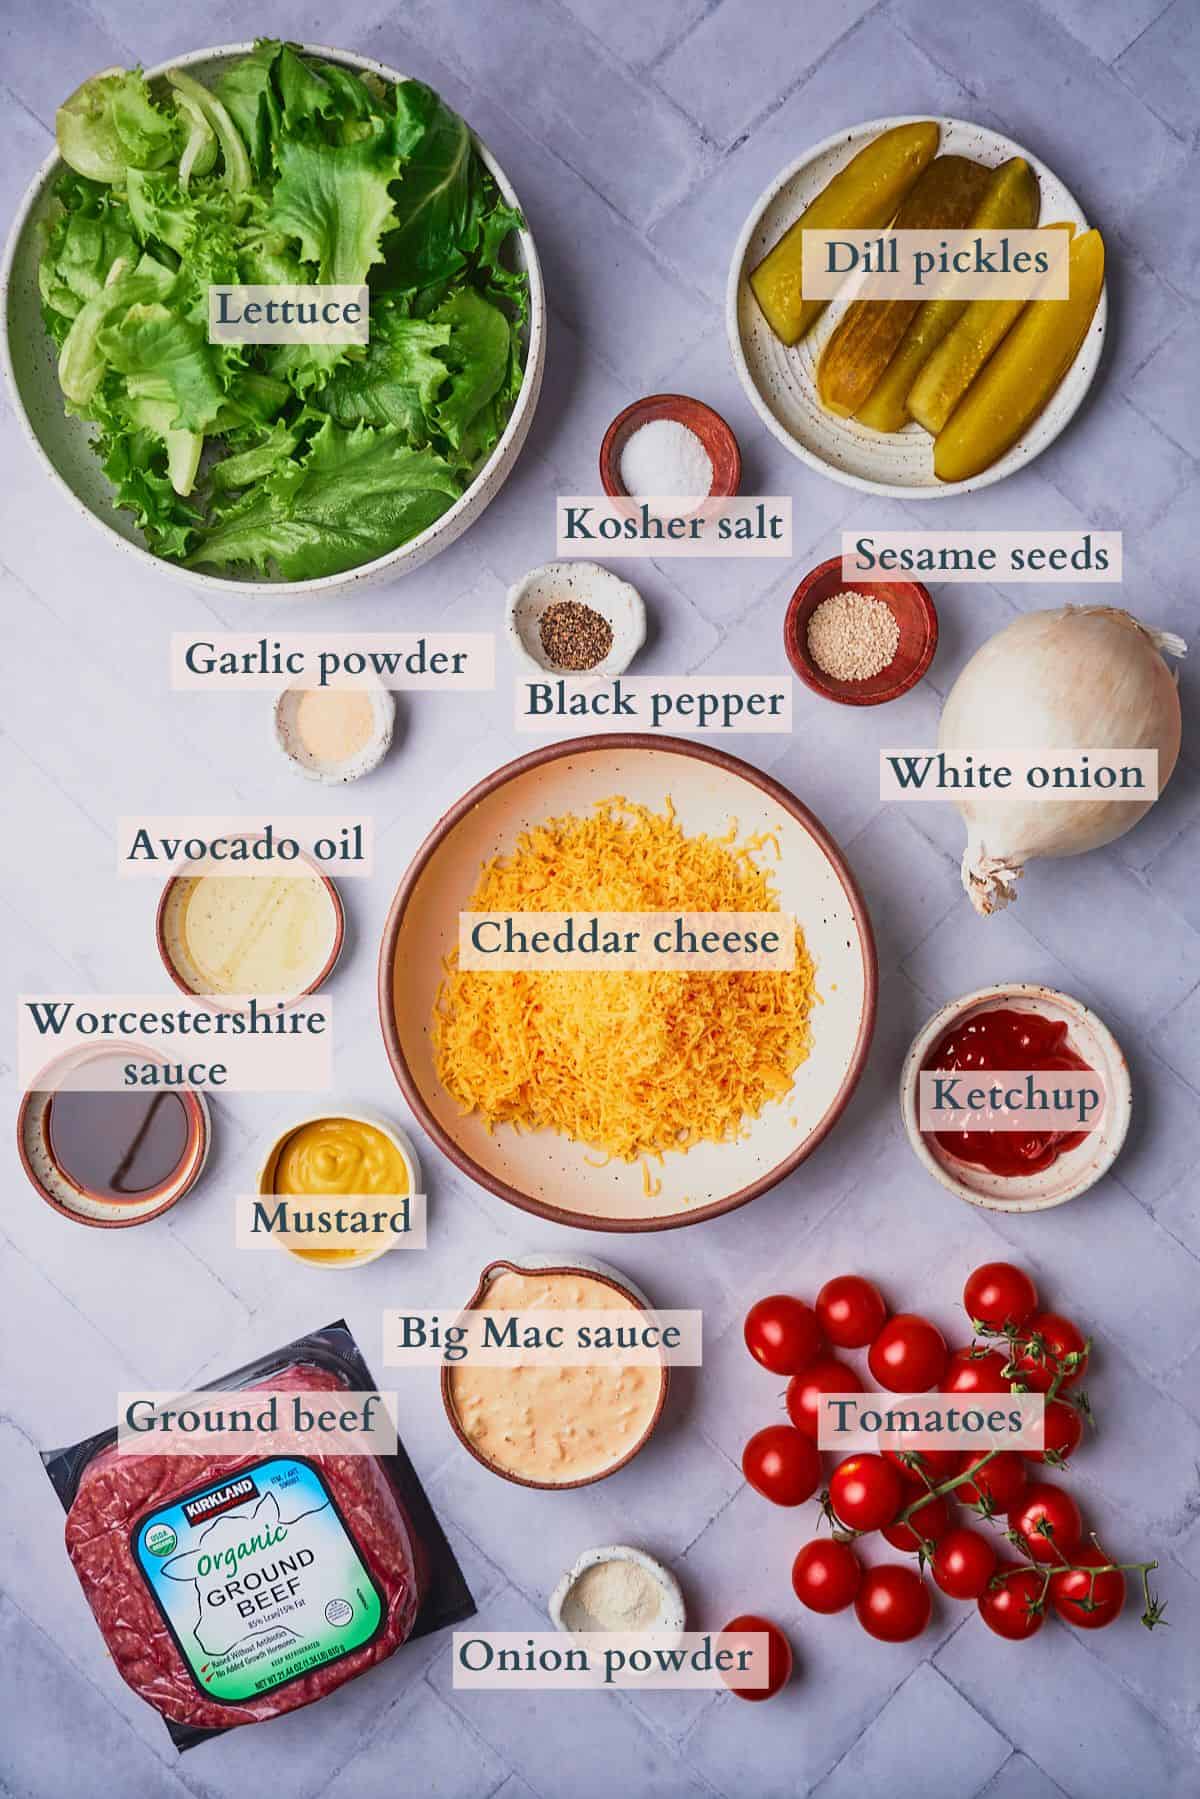 Ingredients to make a big Mac salad laid out on a table in small bowls and on plates and labeled to denote each ingredient.